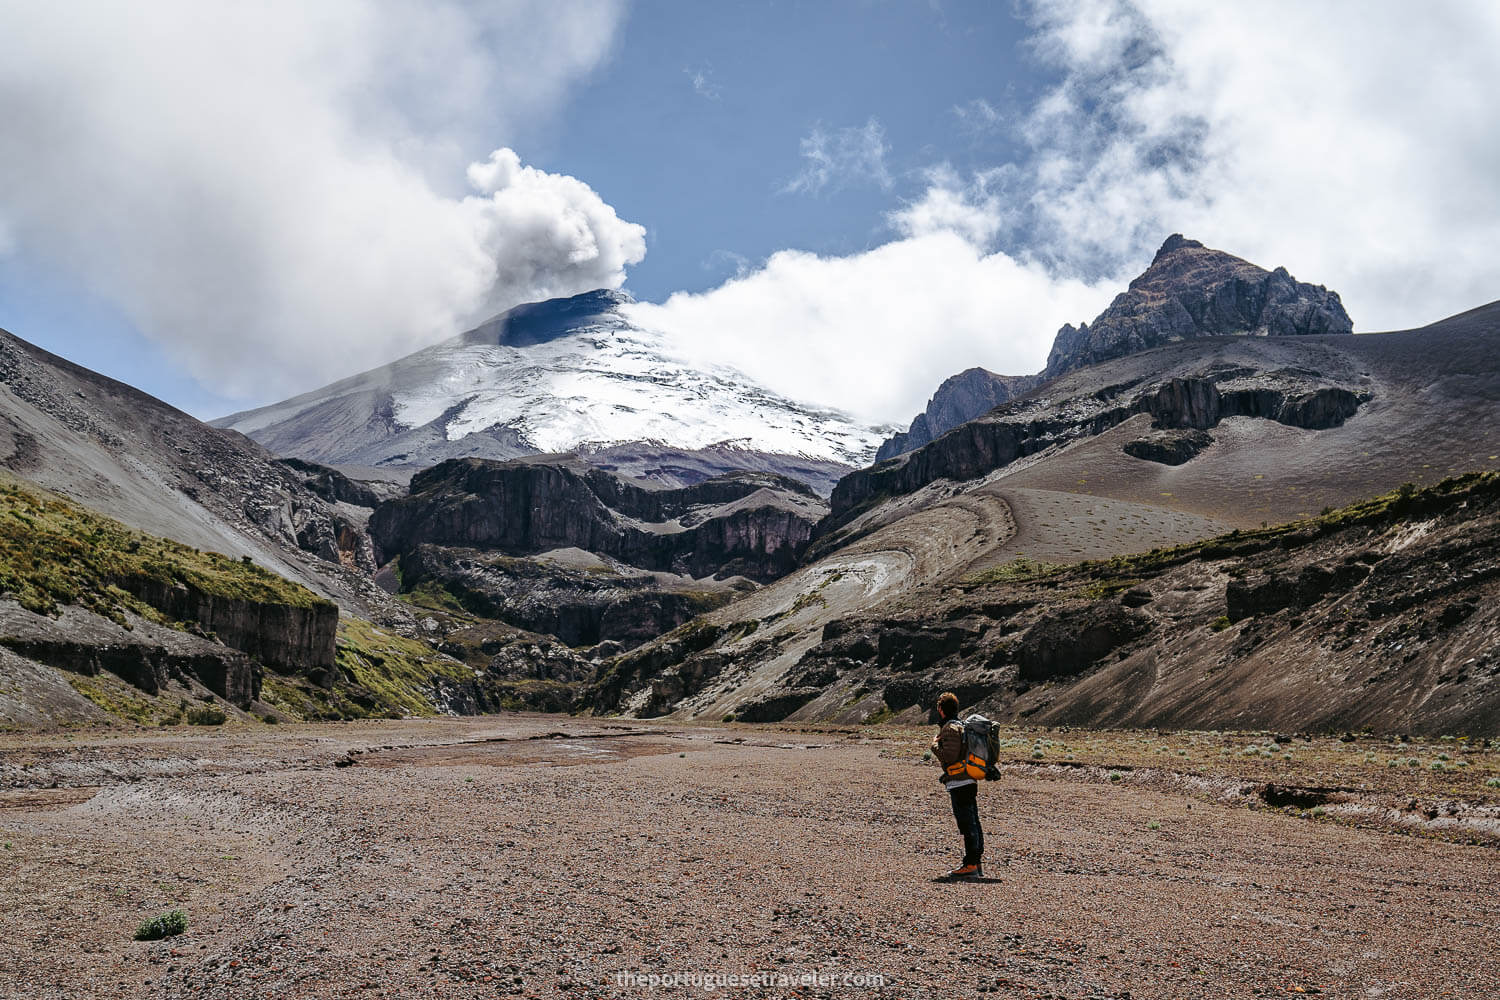 Miguel at the Lahar of Cotopaxi